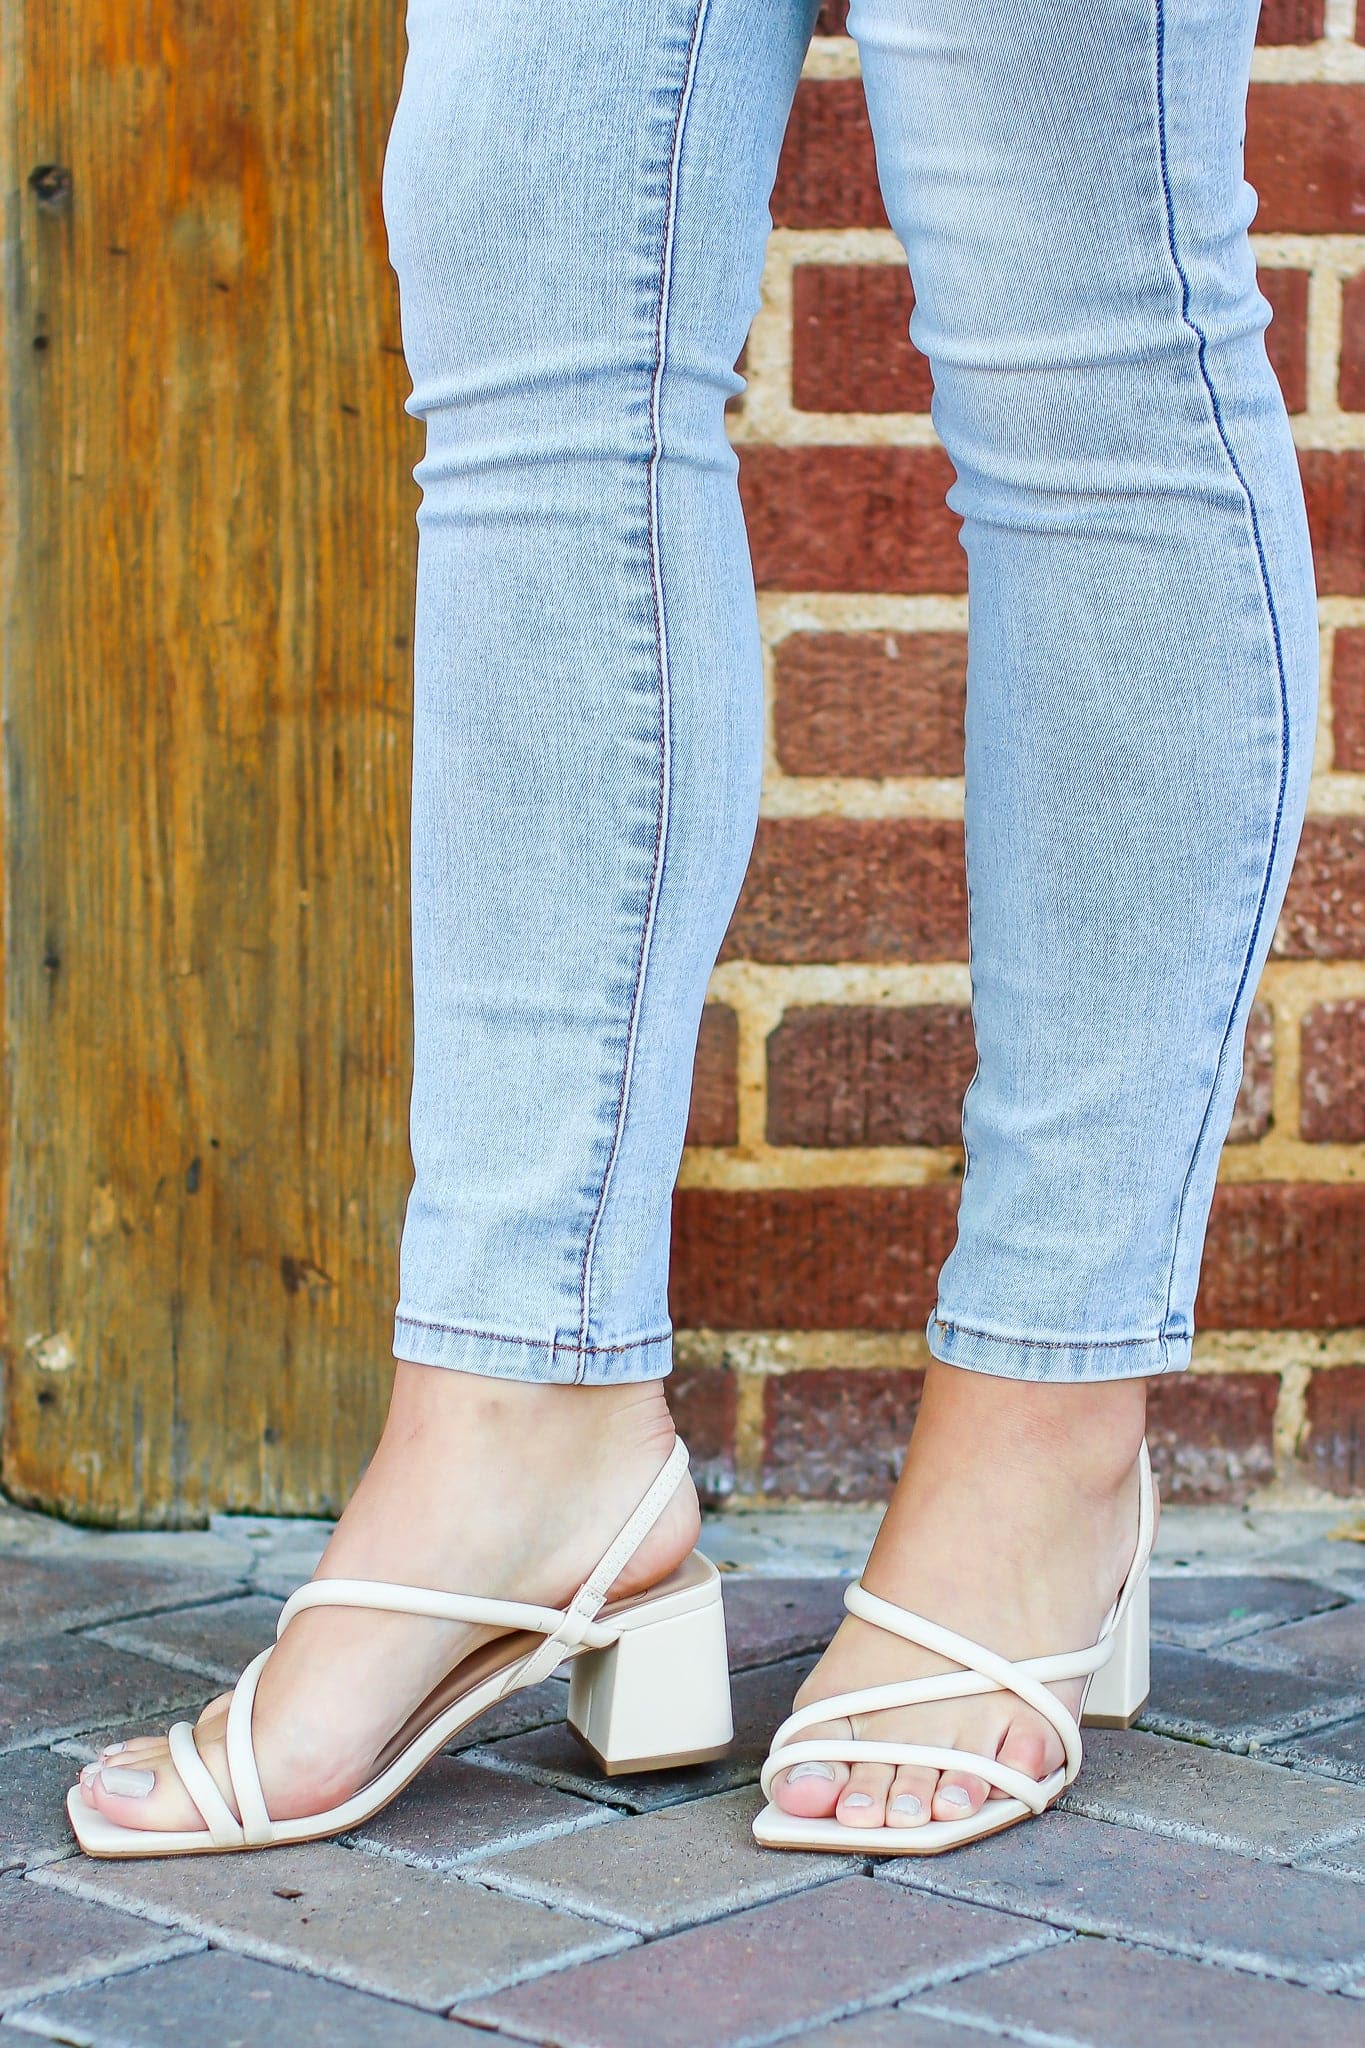  Chic Happens Strappy Heels - FINAL SALE - Madison and Mallory